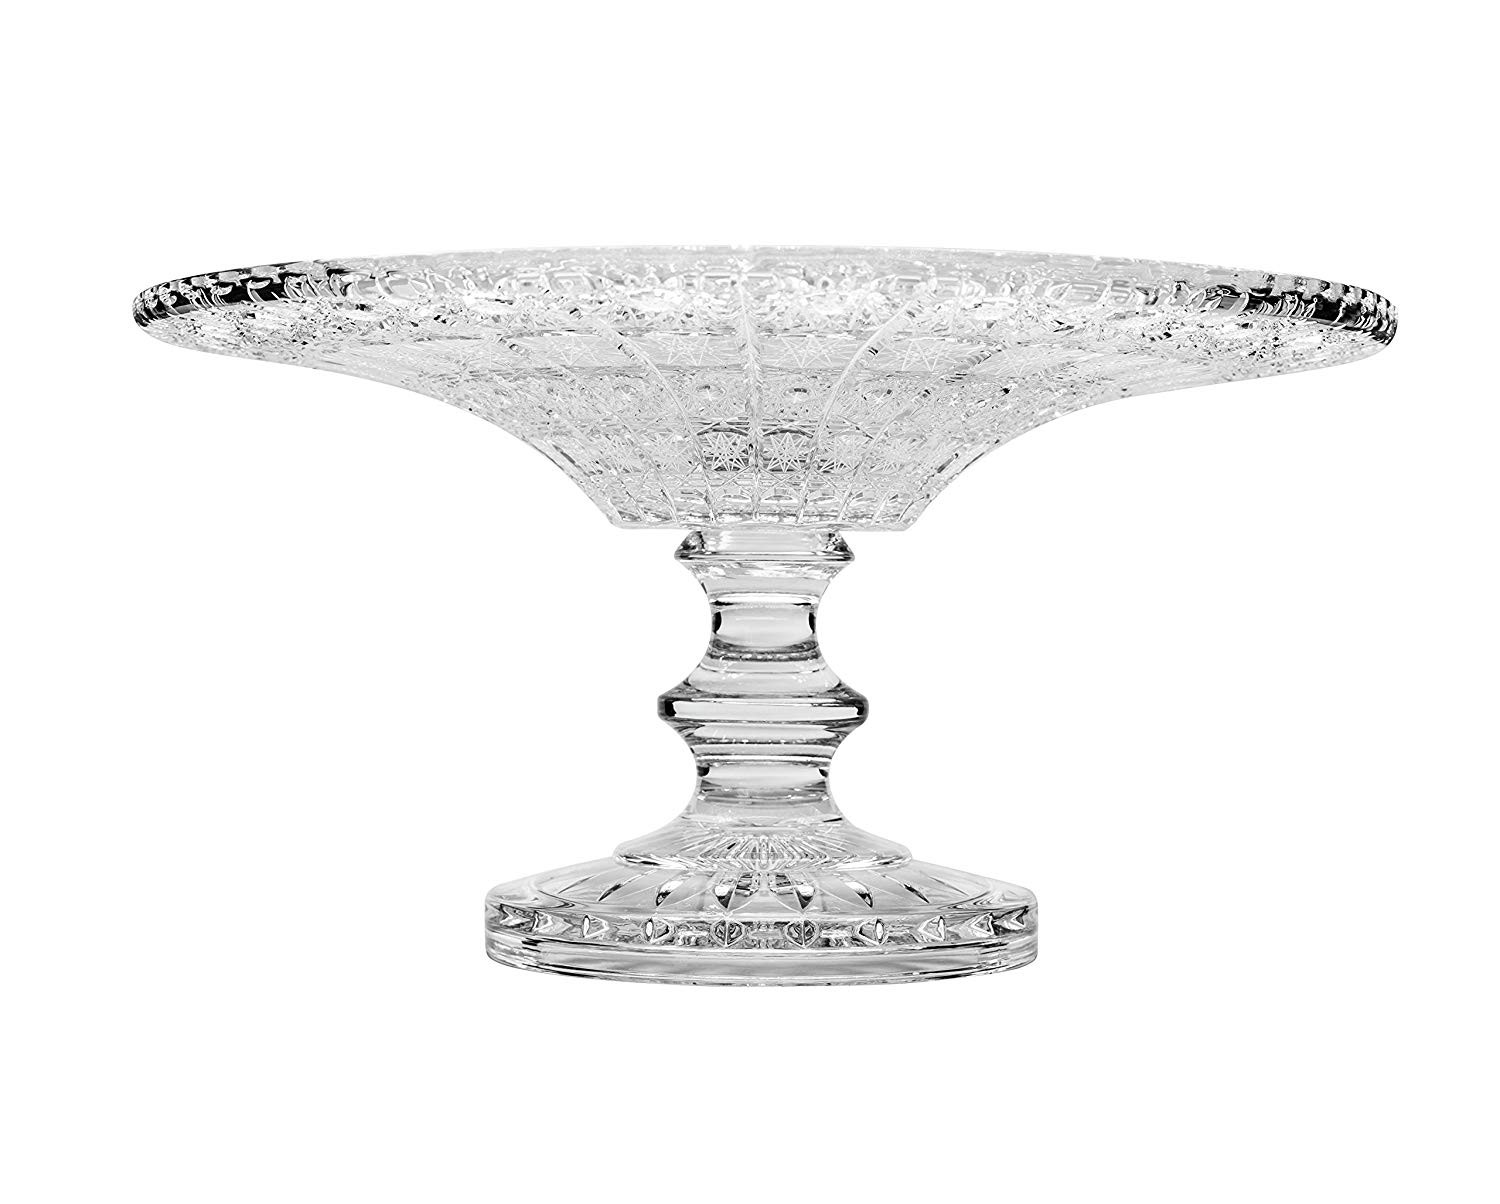 11 Awesome Bohemian Cut Crystal Vase 2024 free download bohemian cut crystal vase of amazon com bohemia crystal footed plate 14 dia round serving regarding amazon com bohemia crystal footed plate 14 dia round serving cake stand decorative centerp